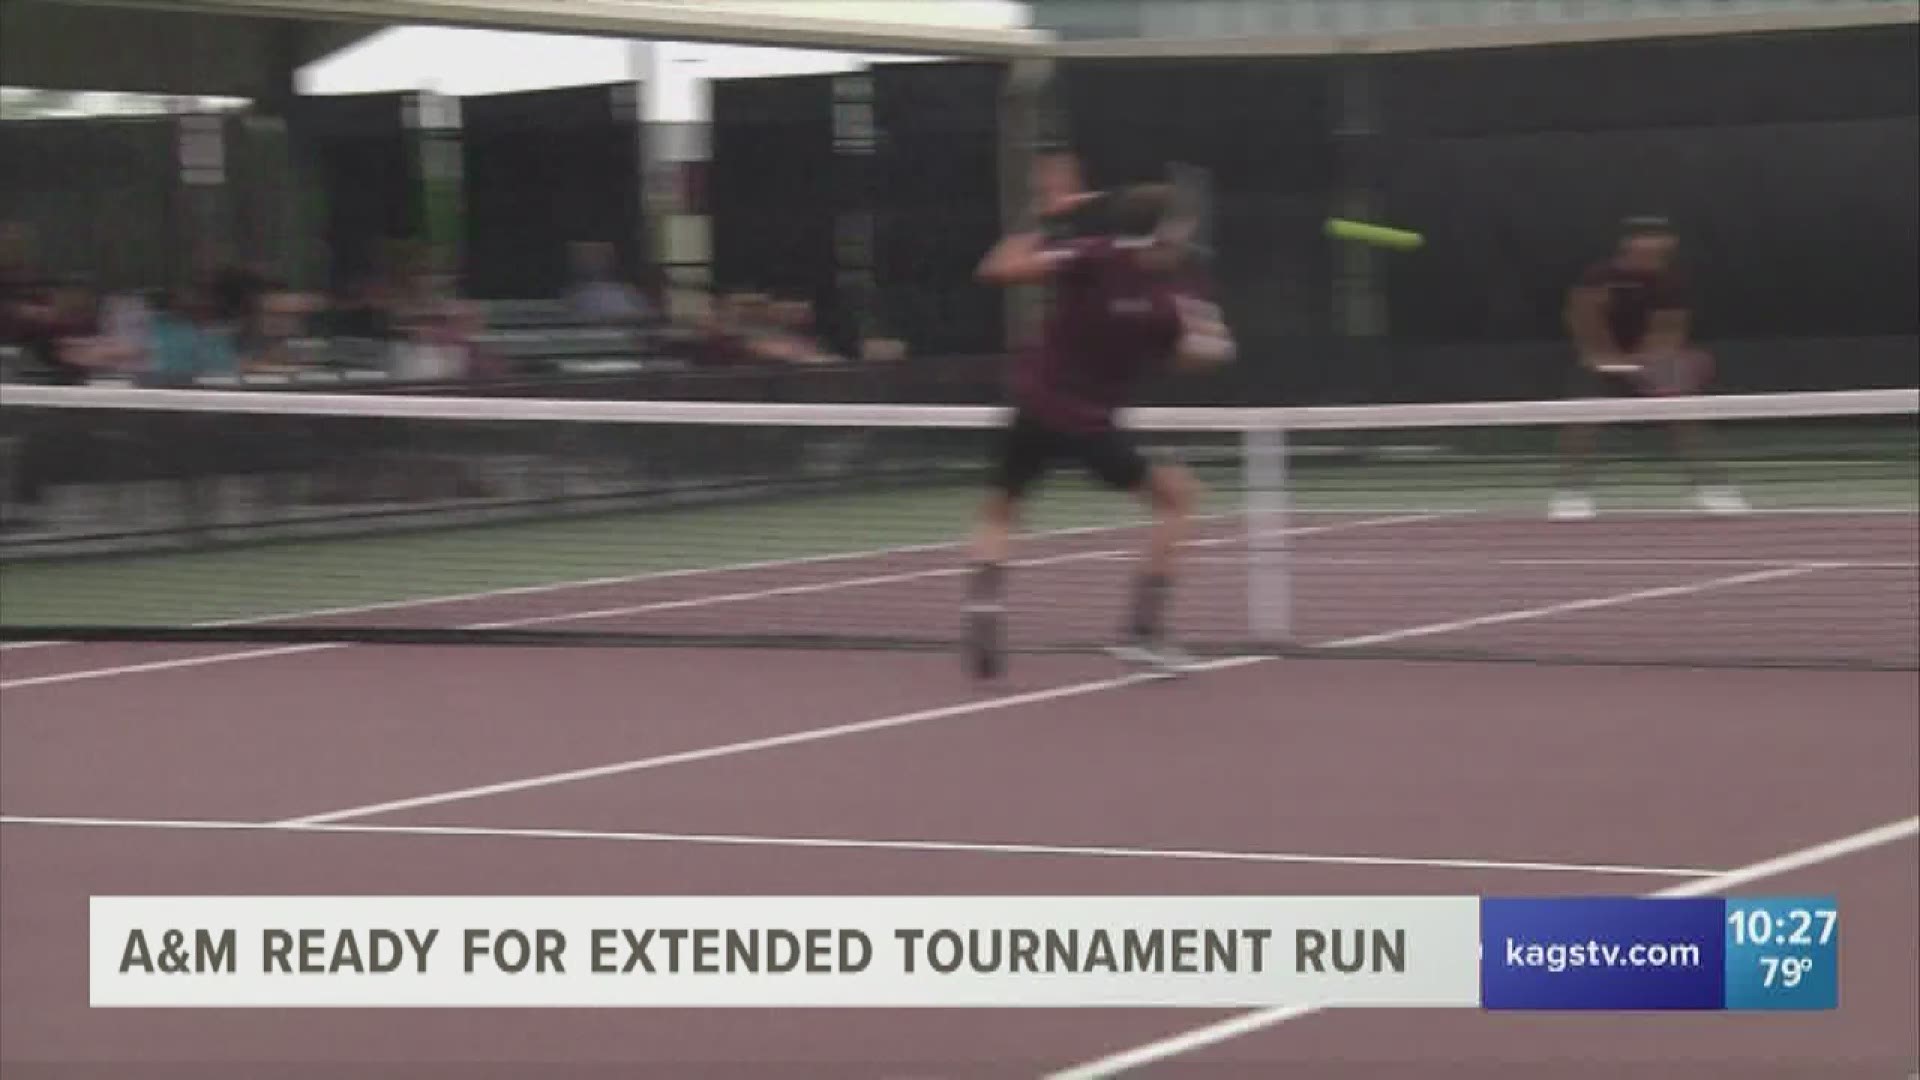 The 5th-ranked Texas A&M men's tennis team will host the first and second rounds of the NCAA Tournament this weekend.